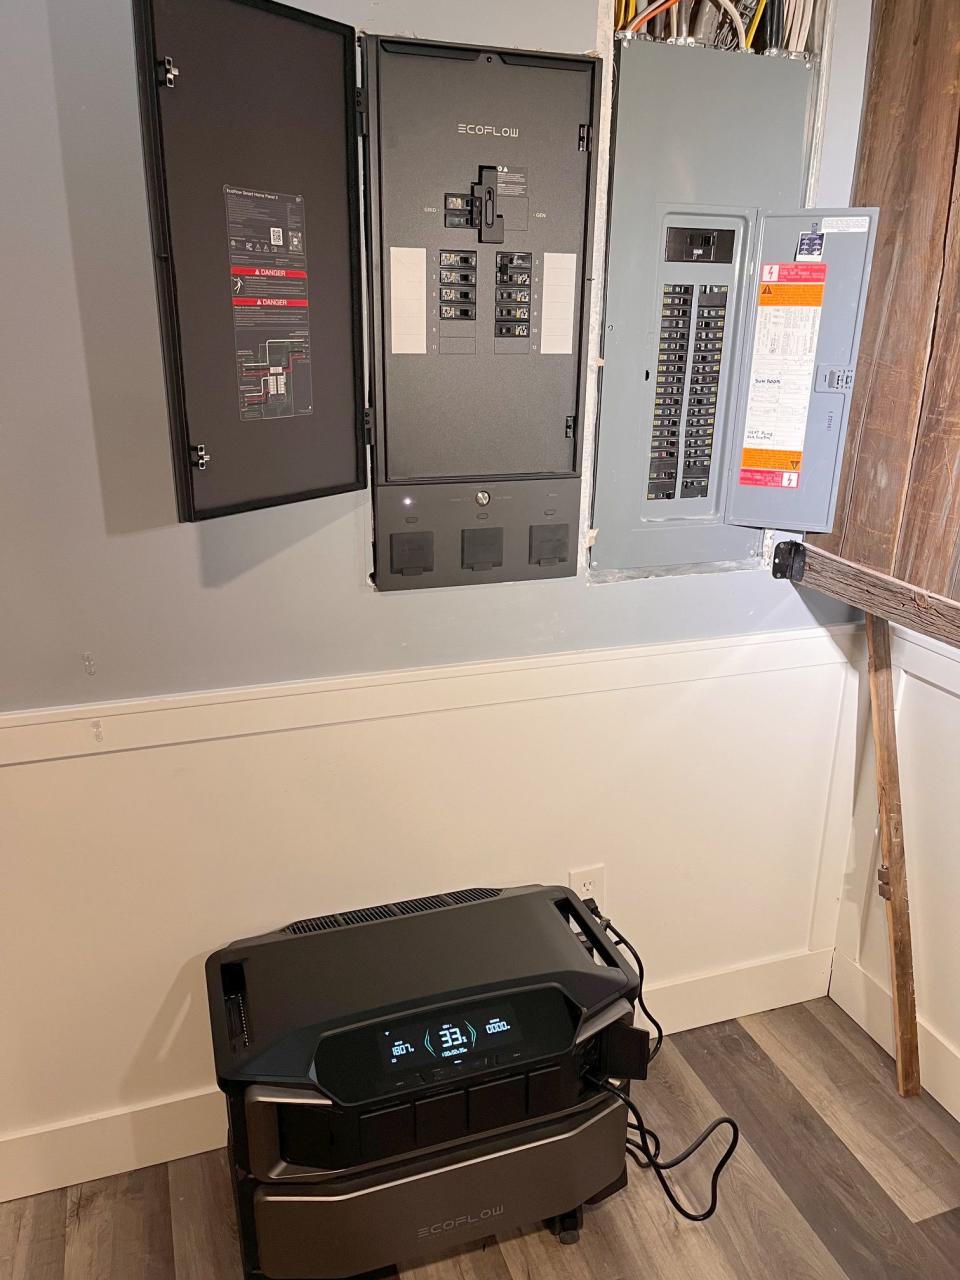 A photo of the Delta Pro Ultra getting its initial charge before being plugged into the Smart Home Panel 2.